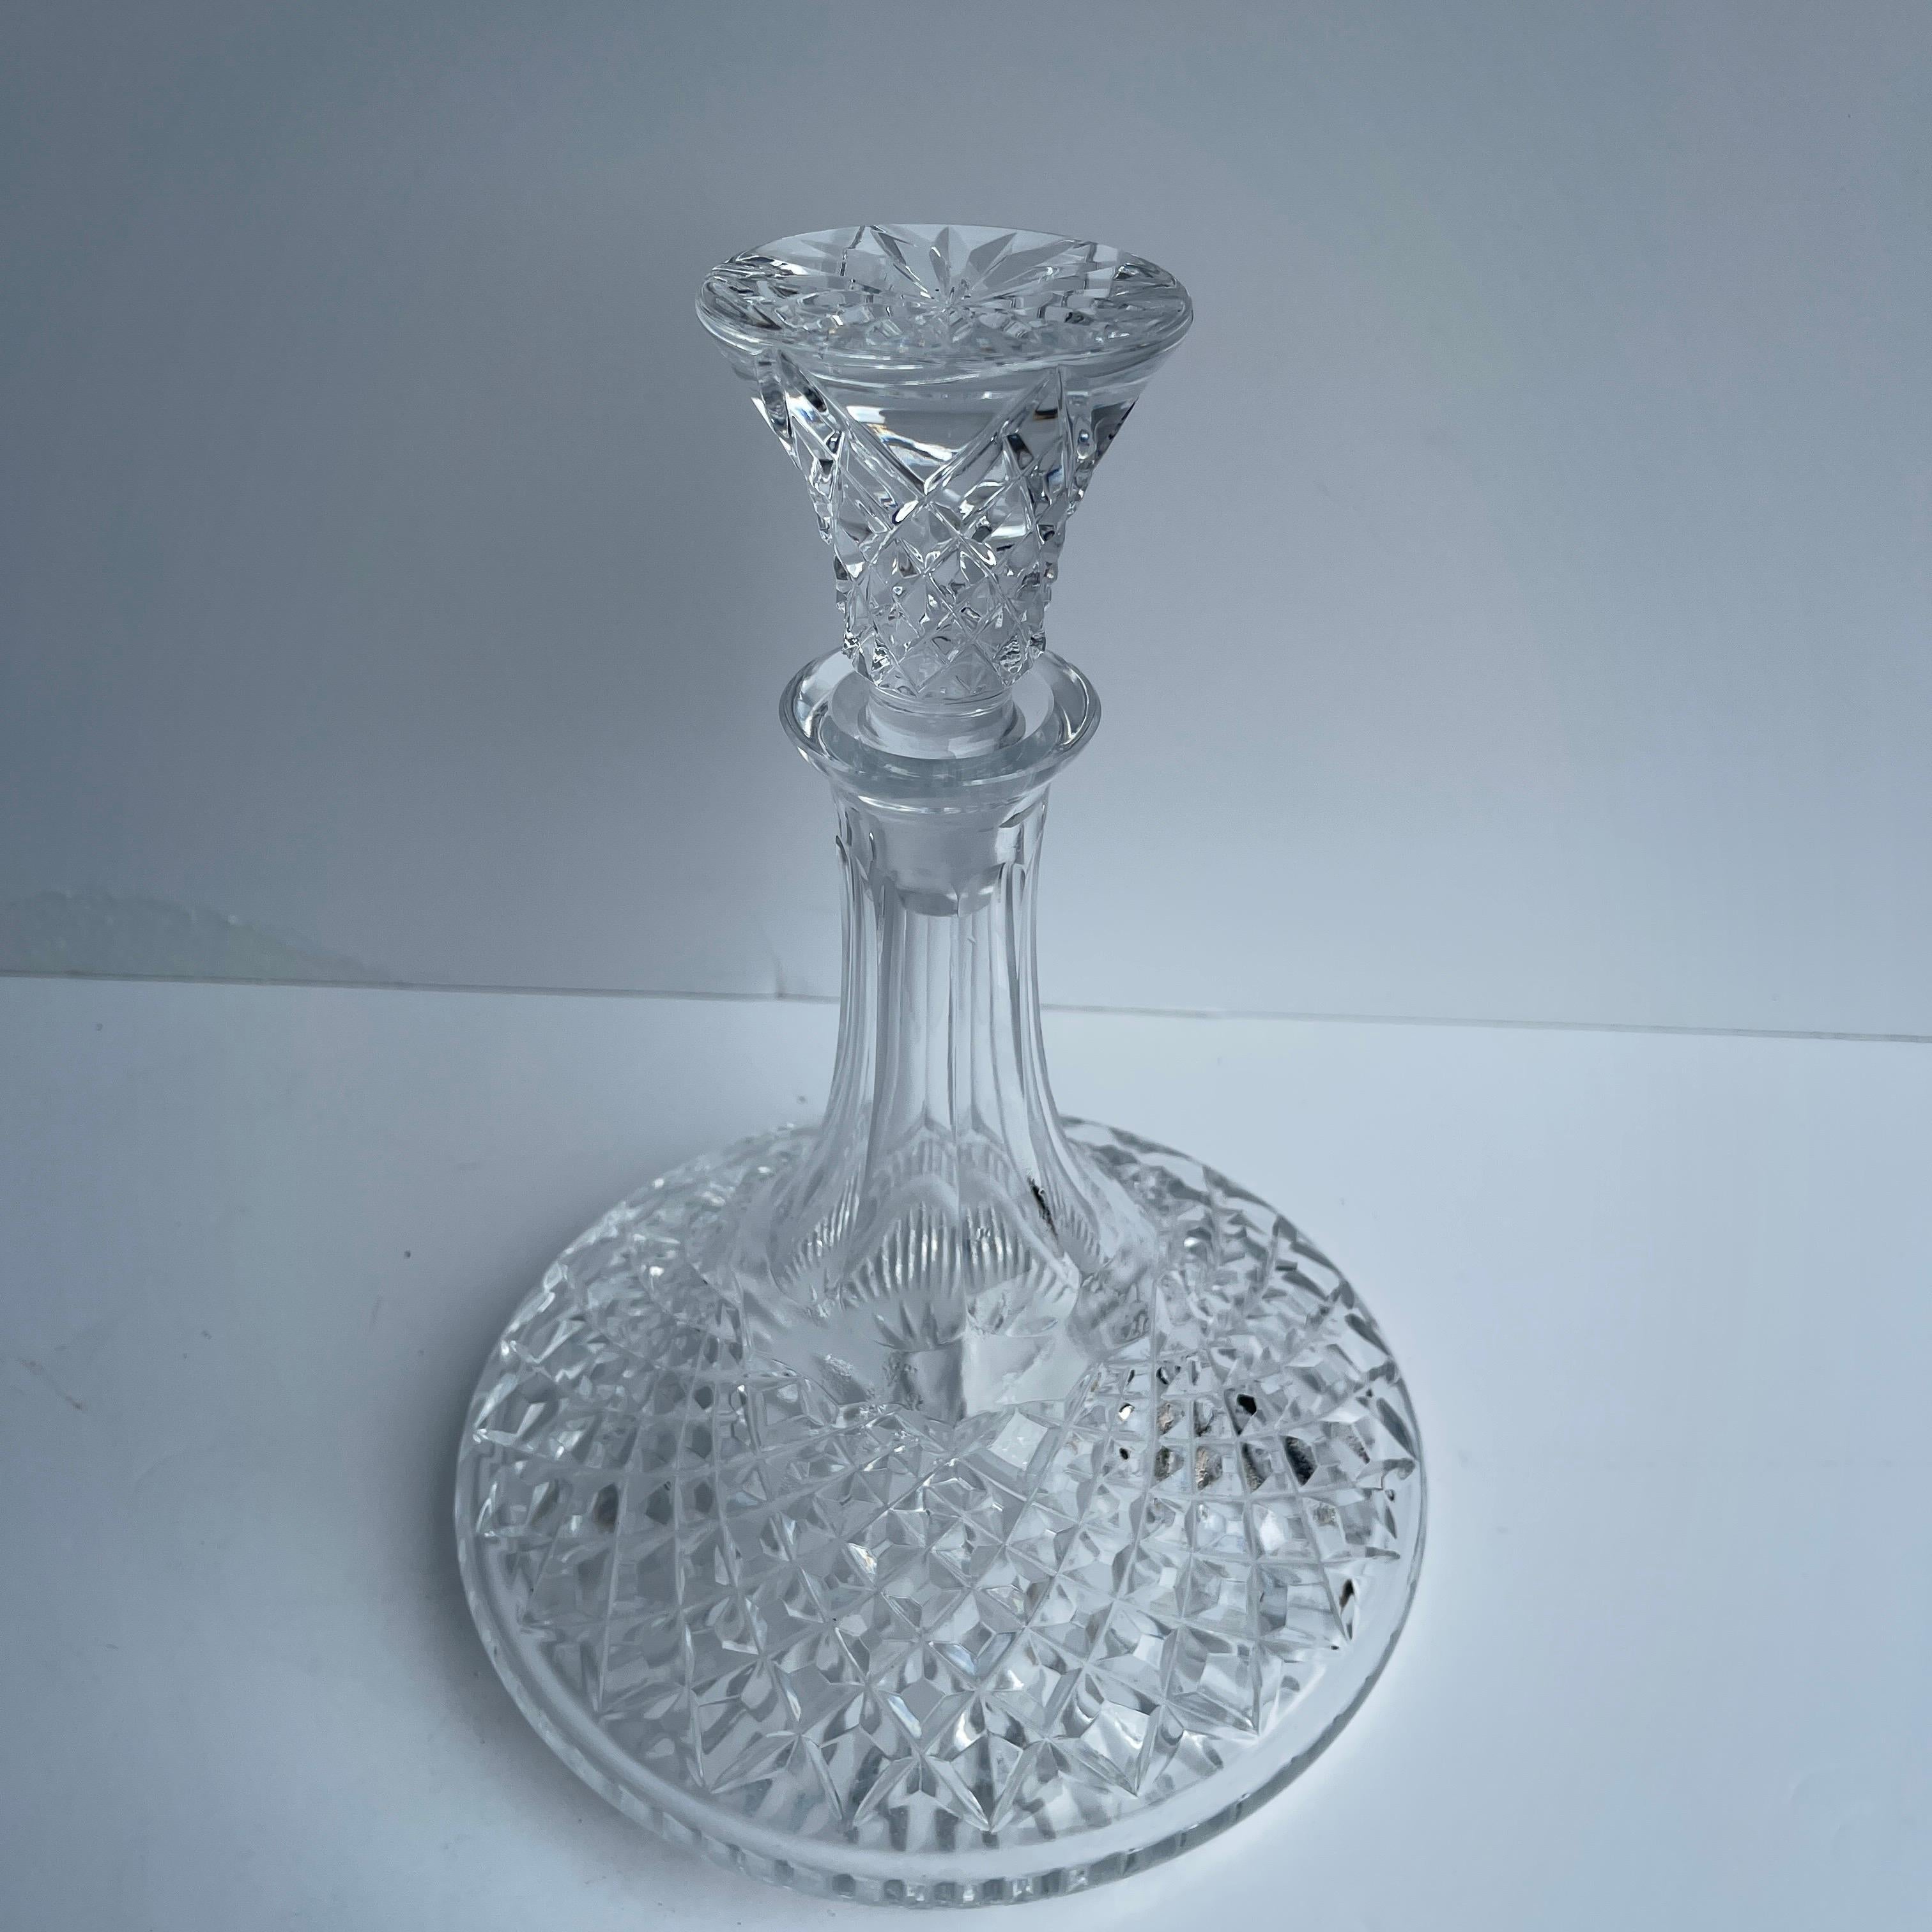 Early 1900's cut glass decanter.
This beautiful decanter is ornately carved throughout the generous base, long stem and flat top stopper. Tall and elegant, the decanter is perfect for wine or spirits. Holding your beverage of choice, the decanter